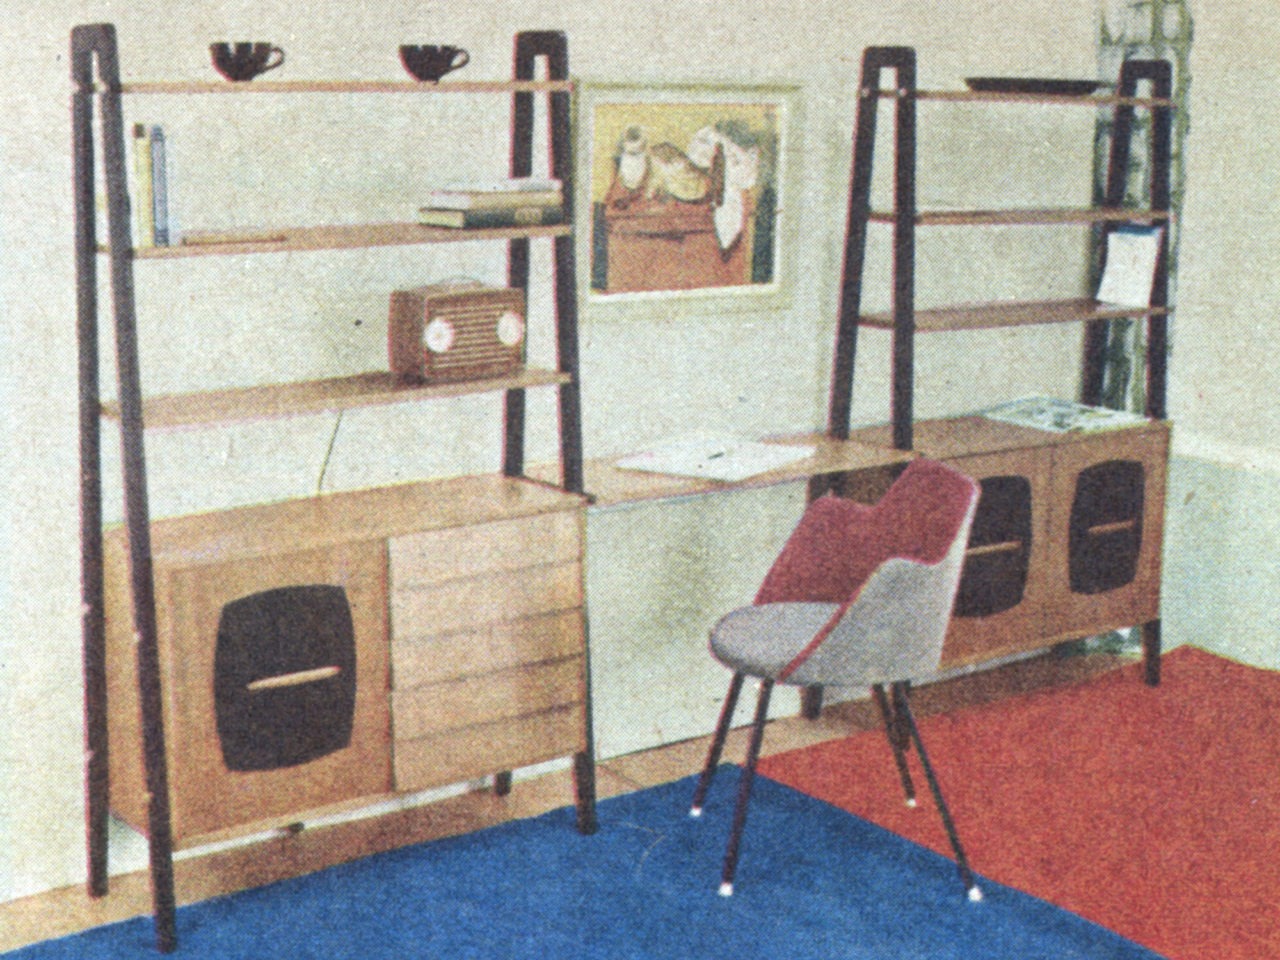 A chair by a piece of storage furniture with a desktop in the middle, all in light, functional style. A red and a blue rug on the floor.